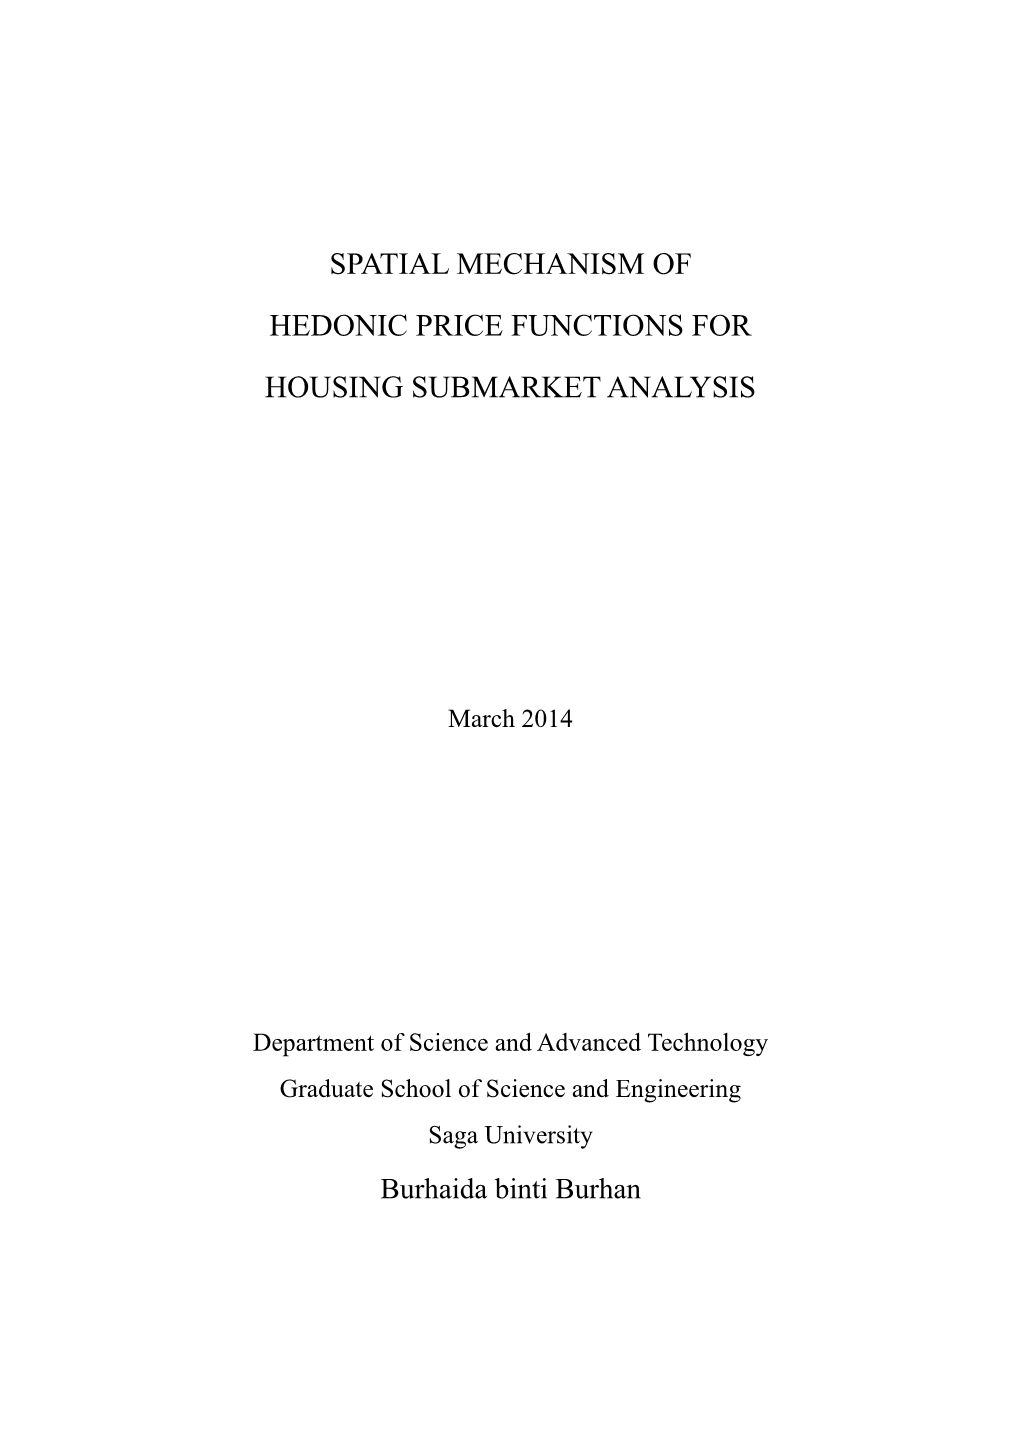 Spatial Mechanism of Hedonic Price Functions for Housing Submarket Analysis